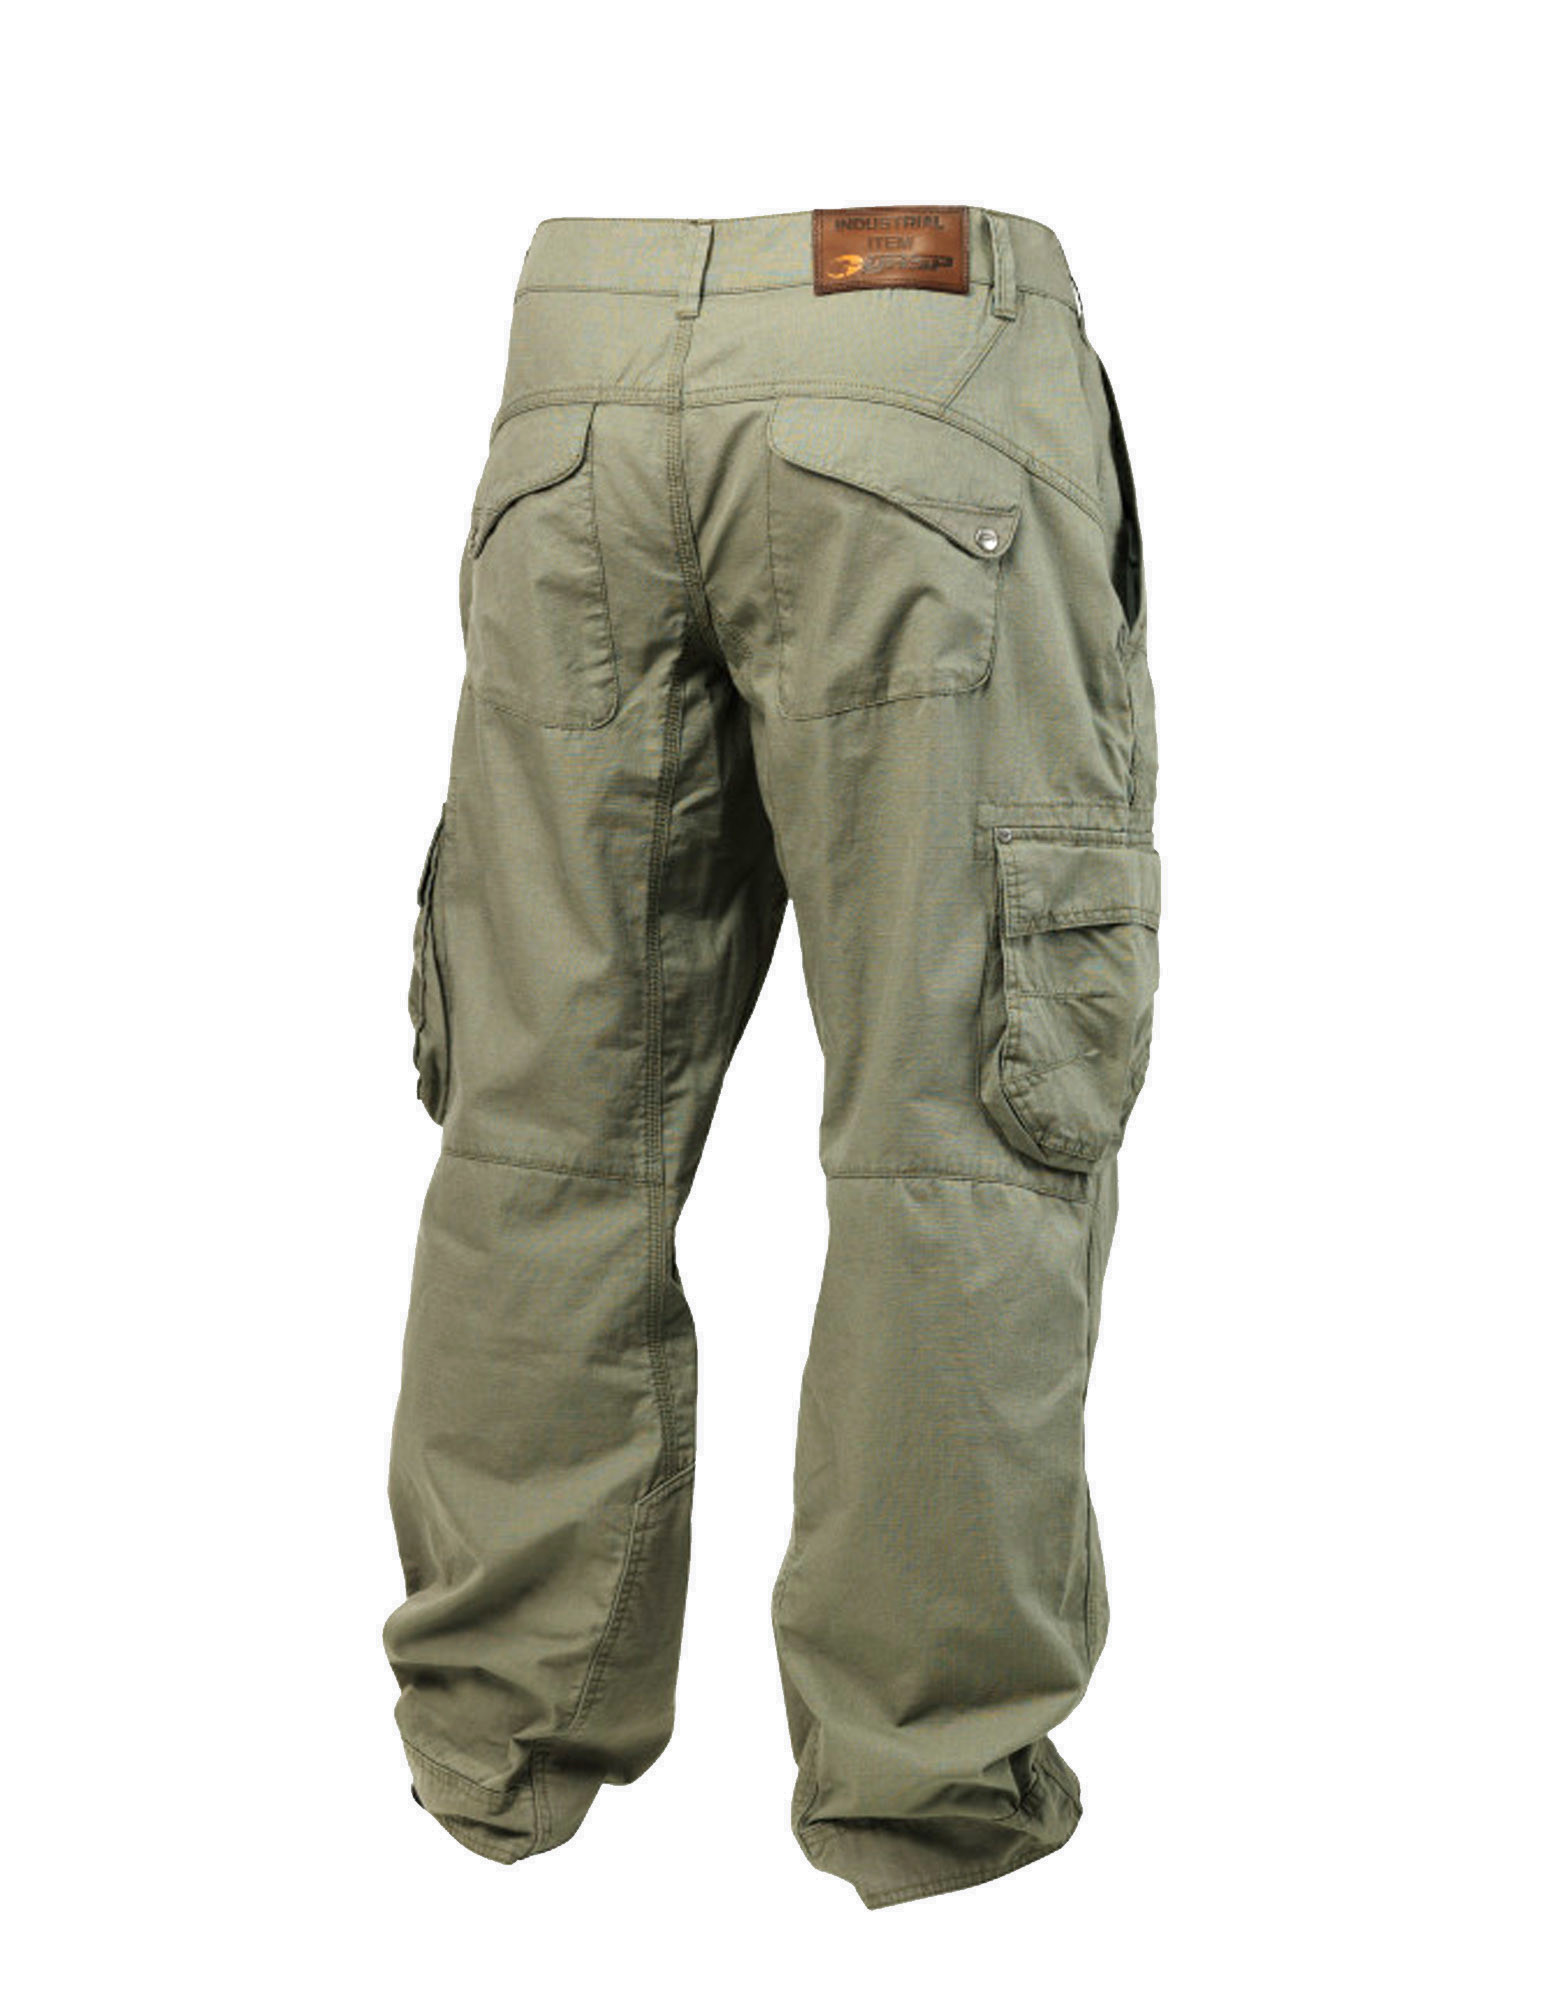 Gasp Street Pant by GASP WEAR (color: wash green)